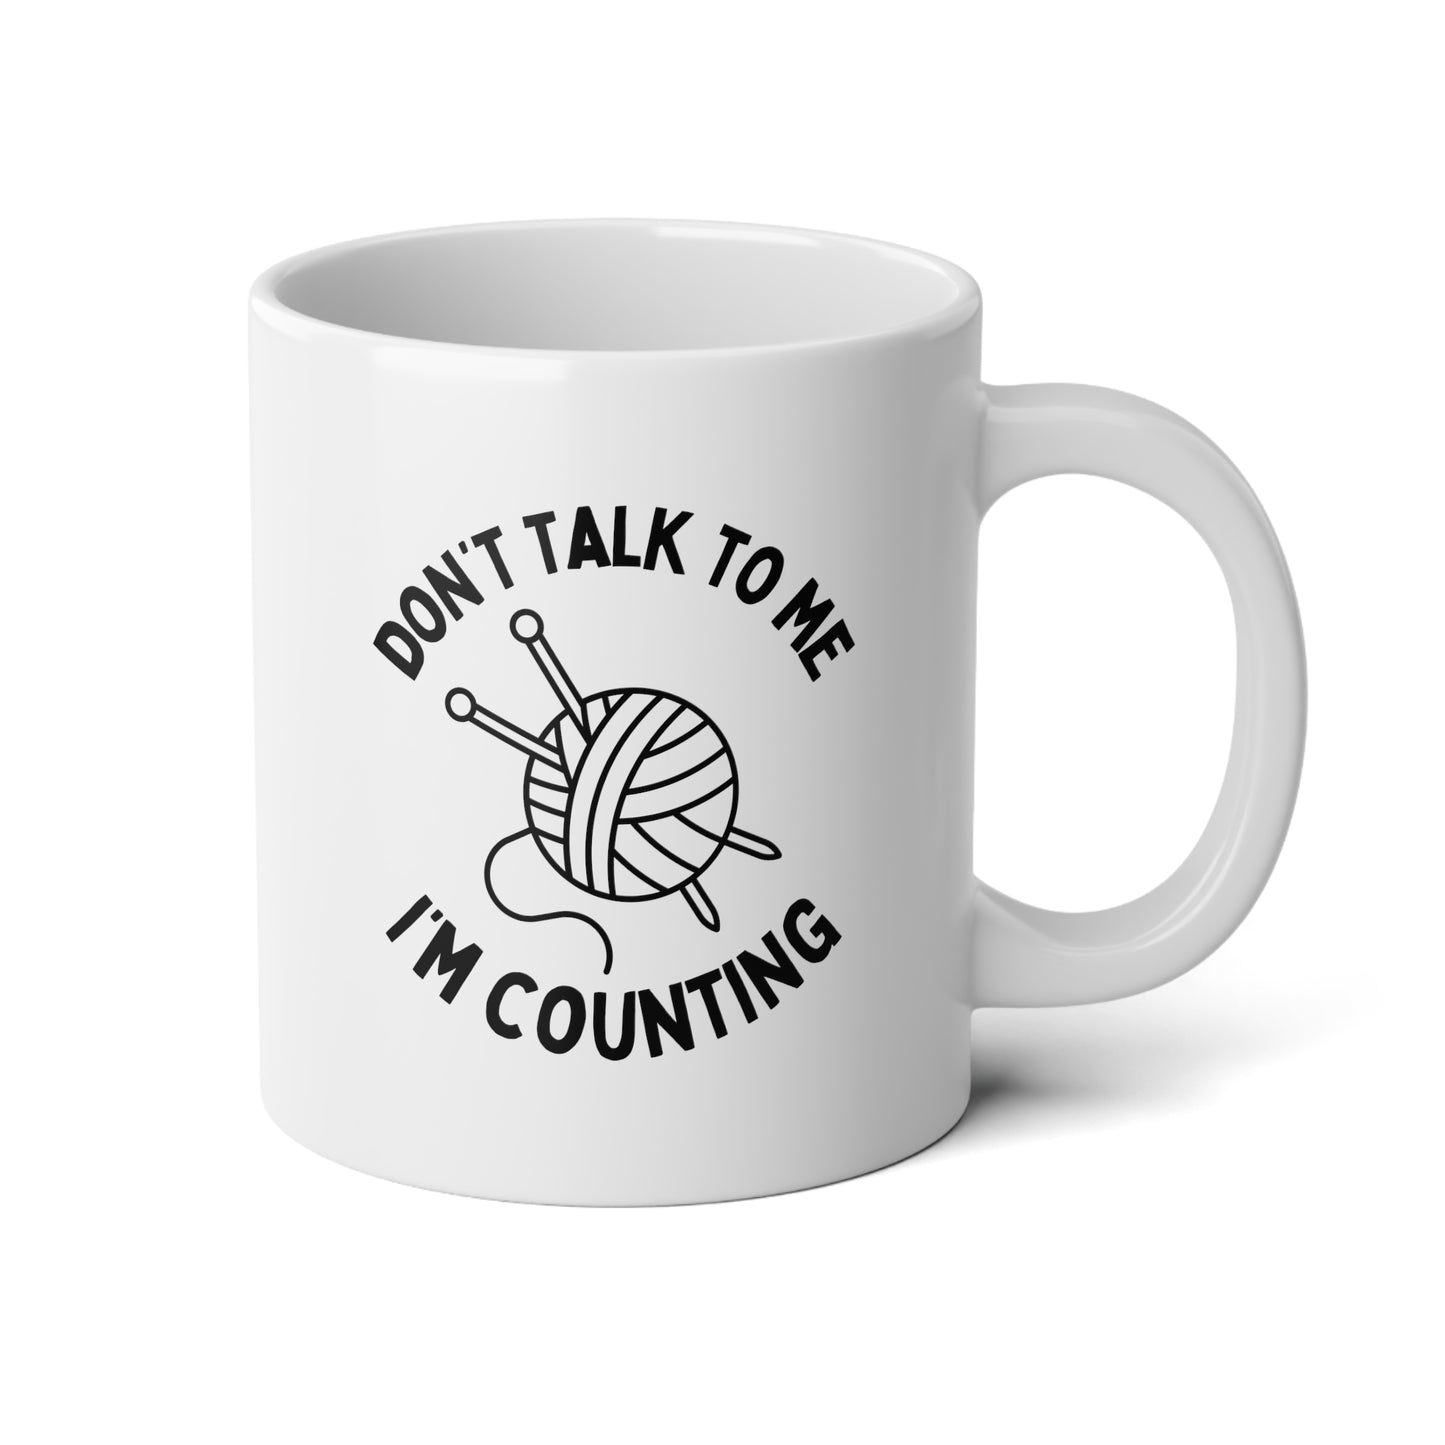 Don't Talk To Me I'm Counting 20oz white funny large coffee mug gift for knitter knitting crochet crocheter knit hobby waveywares wavey wares wavywares wavy wares